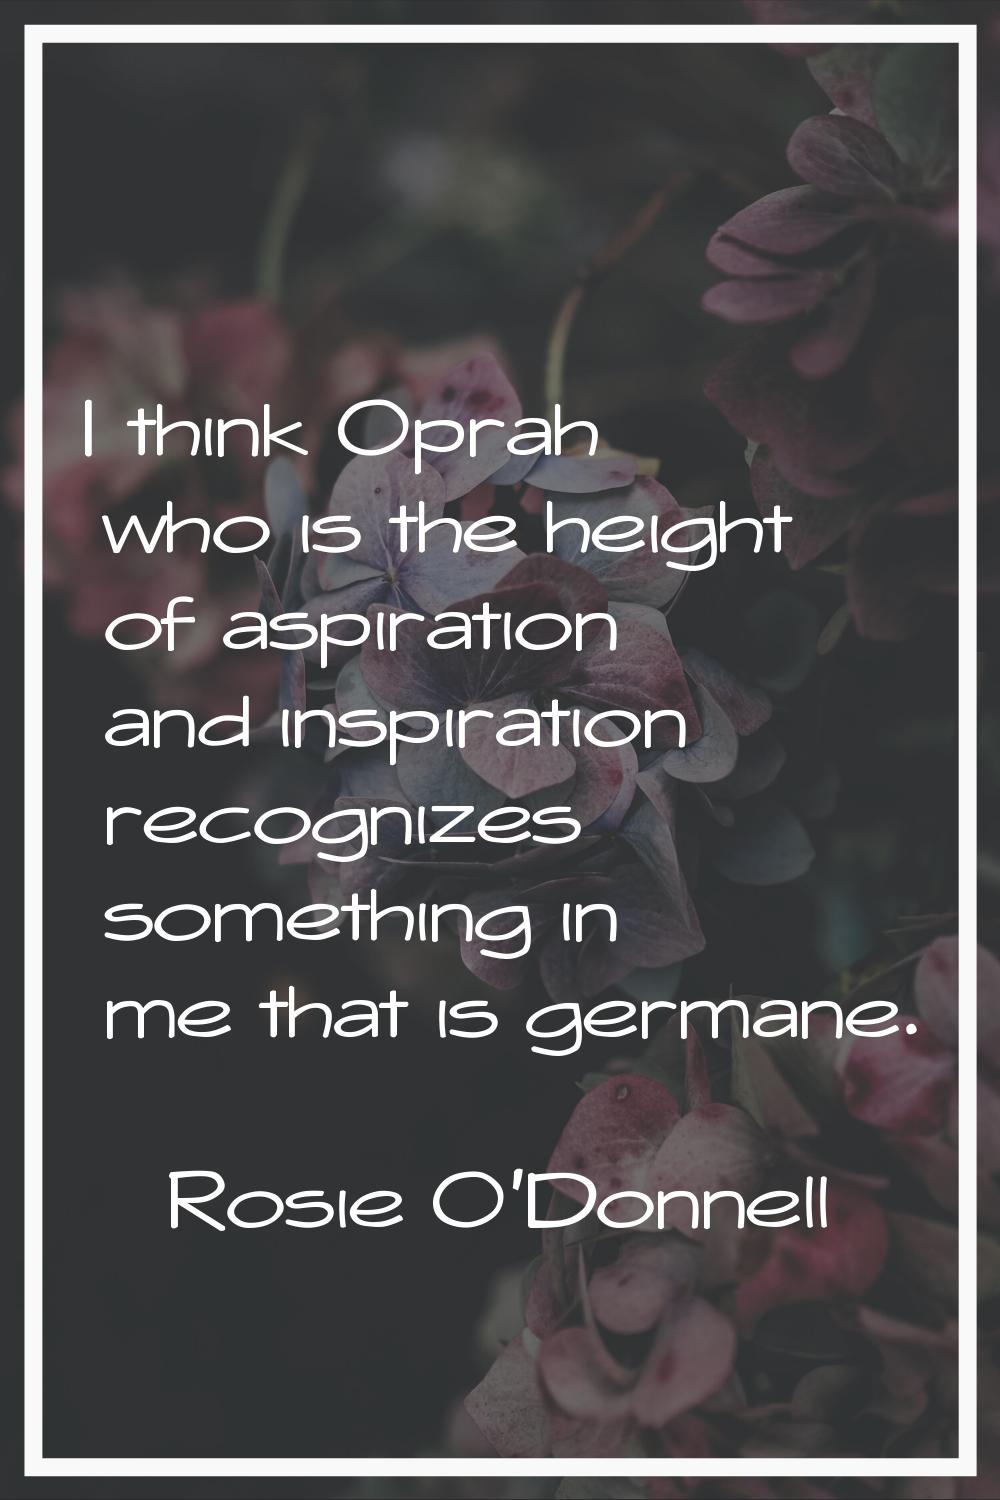 I think Oprah who is the height of aspiration and inspiration recognizes something in me that is ge